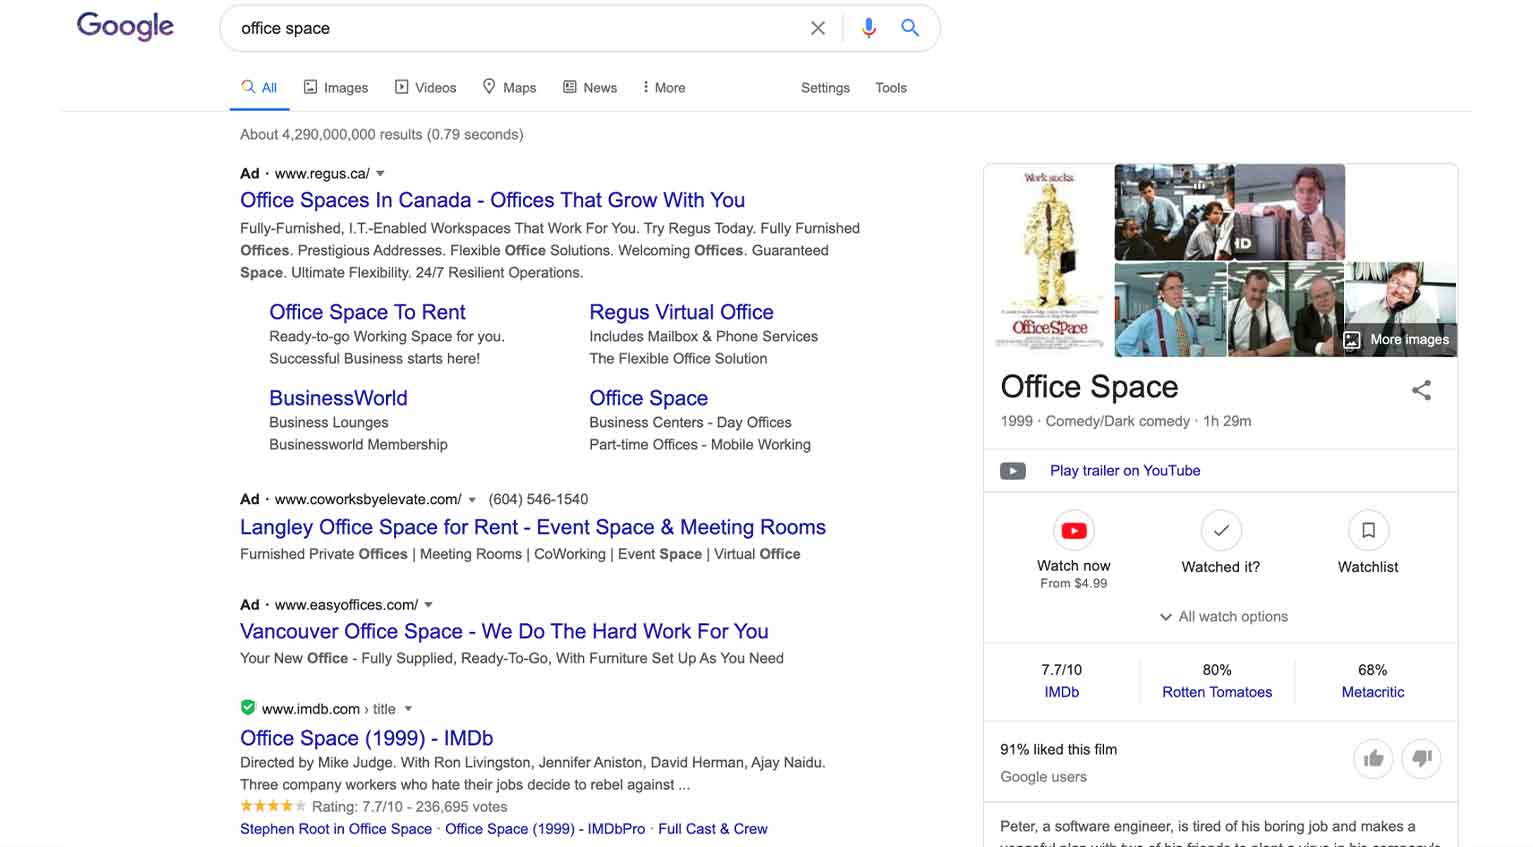 When I search for "office space," am I looking for a commercial lease or where to buy the movie of the same name?